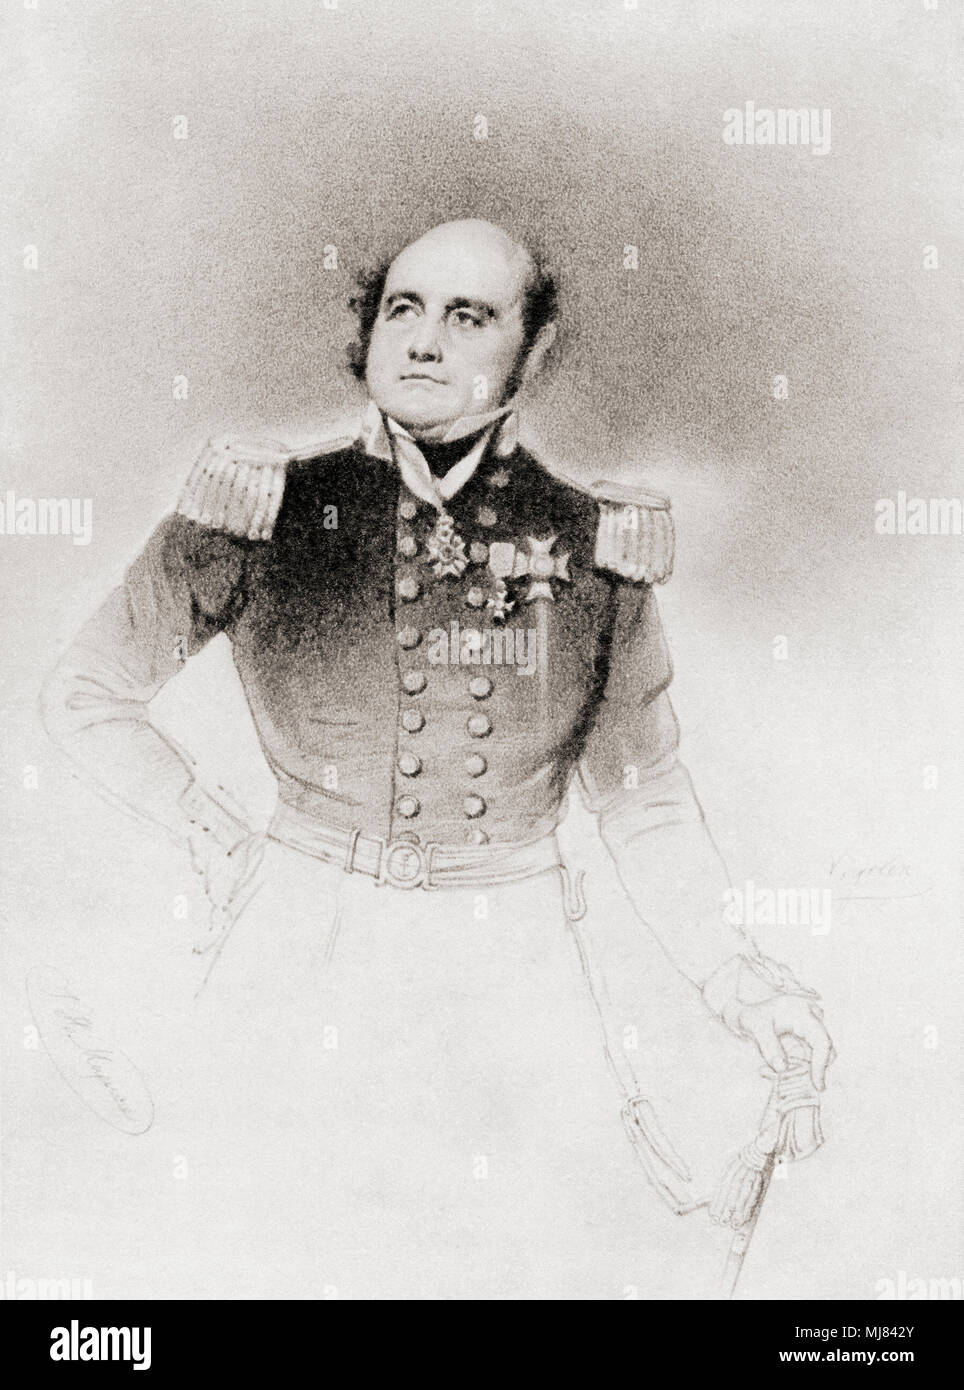 Sir John Franklin, 1786 – 1847.  English Royal Navy officer, explorer of the Arctic and Lieutenant-Governor of Van Diemen's Land (now Tasmania) from 1837 to 1843. He disappeared on his last expedition, attempting to chart and navigate a section of the Northwest Passage in the Canadian Arctic.  From British Polar Explorers, published 1943. Stock Photo